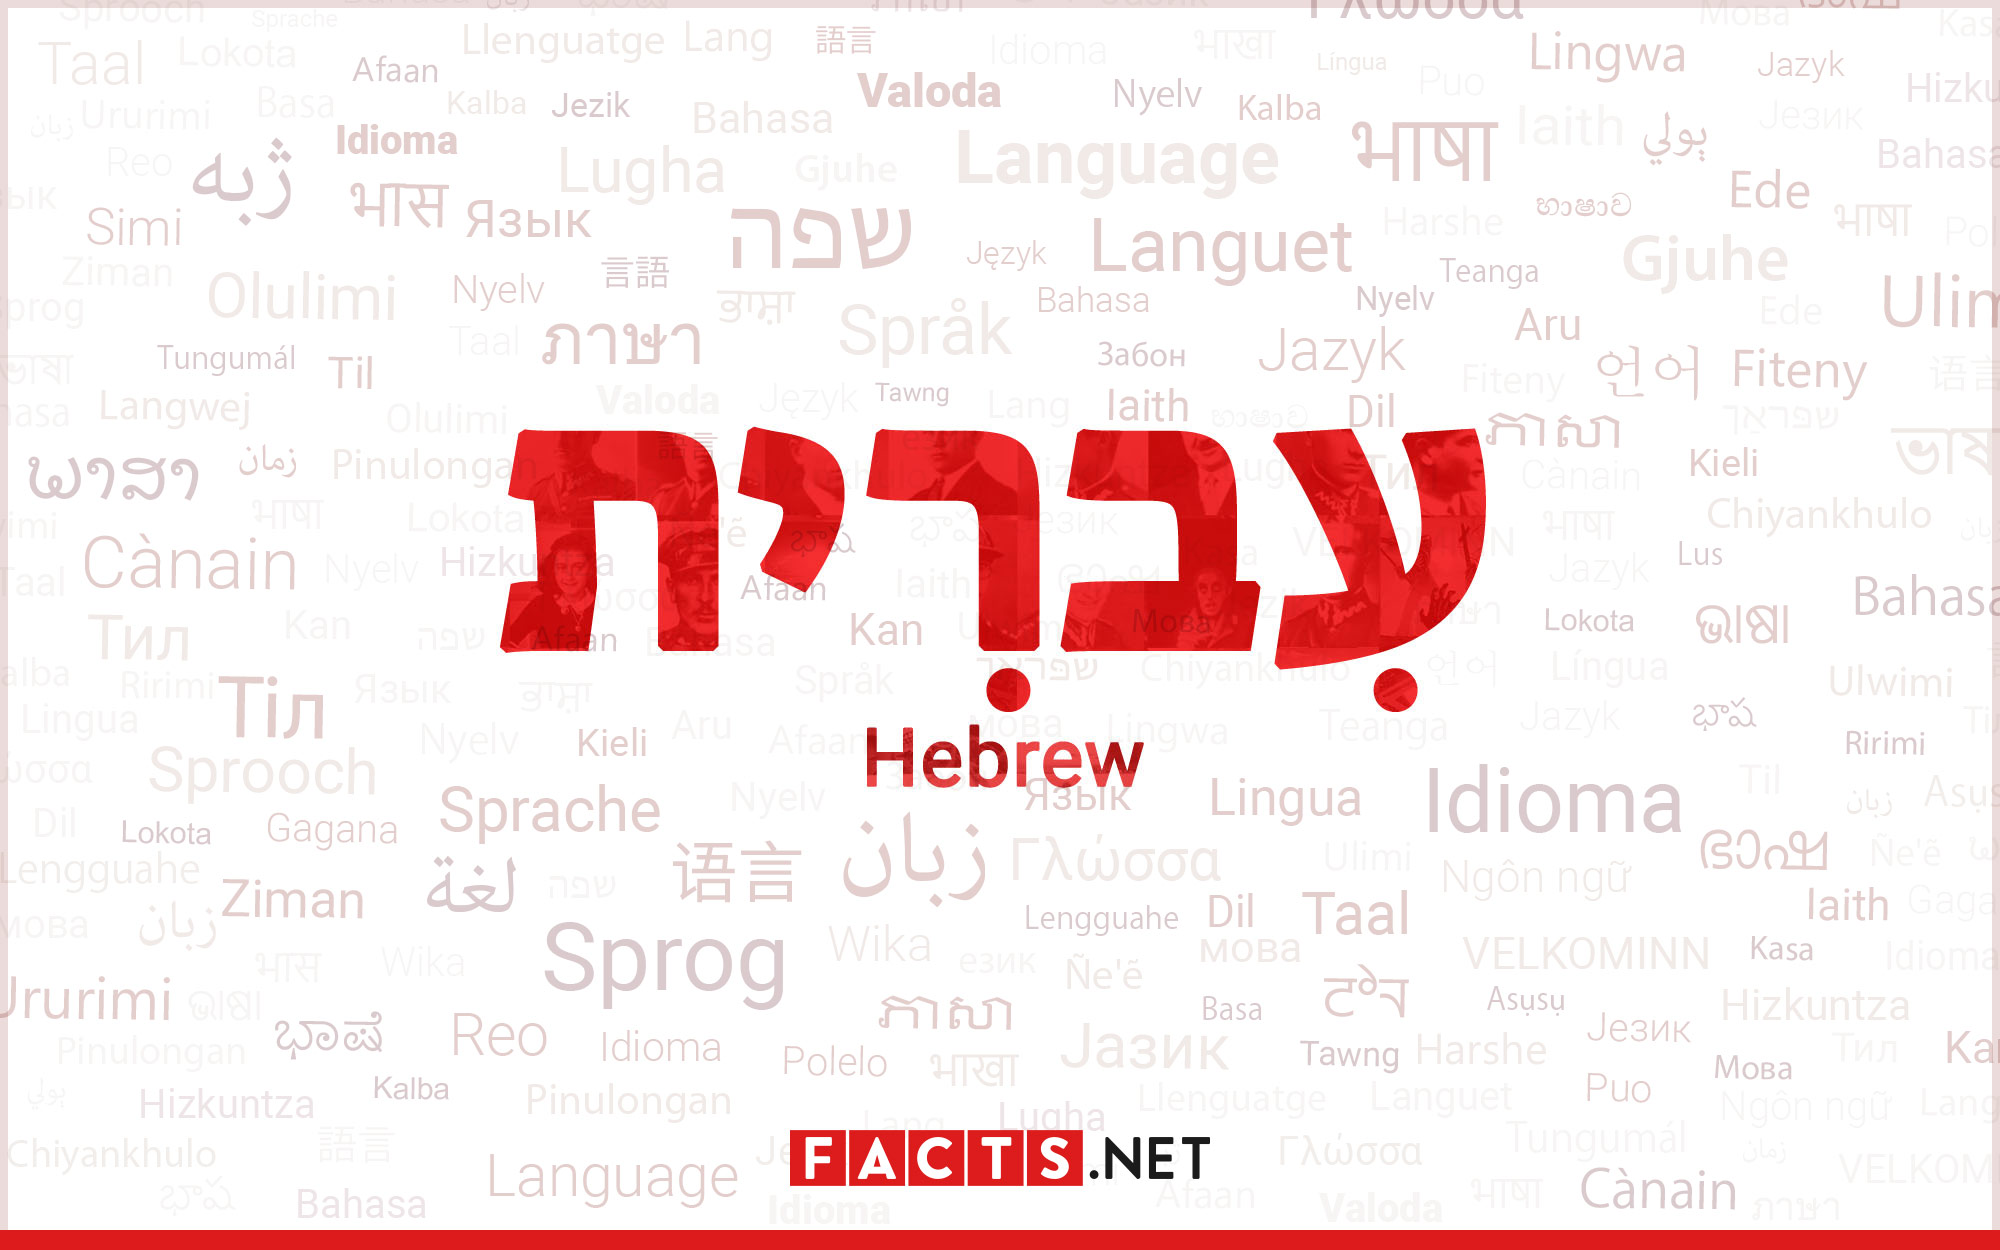 17-mind-blowing-facts-about-hebrew-language